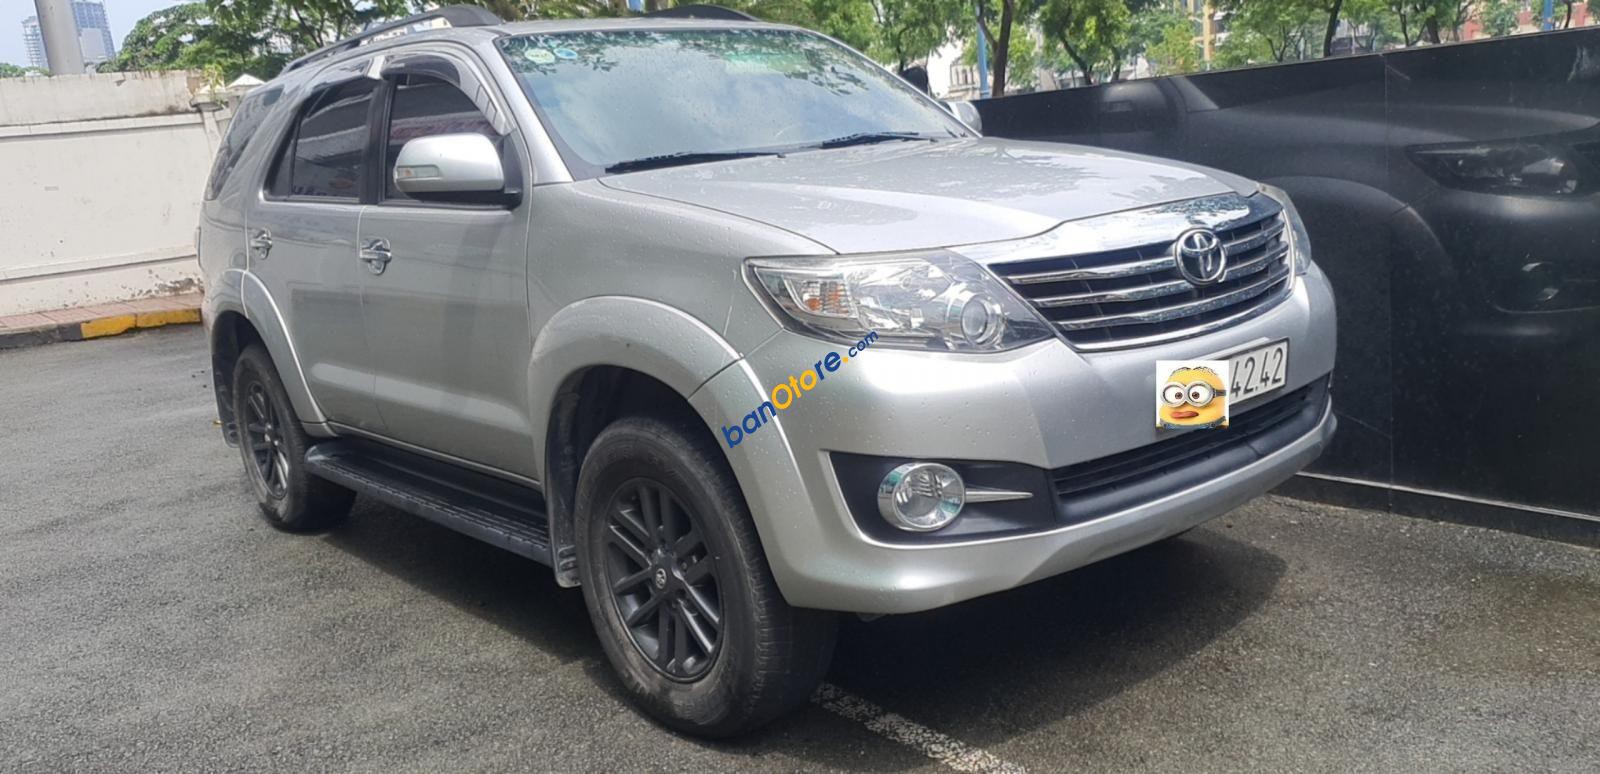 Bán Toyota Fortuner sản xuất 2016, 640tr